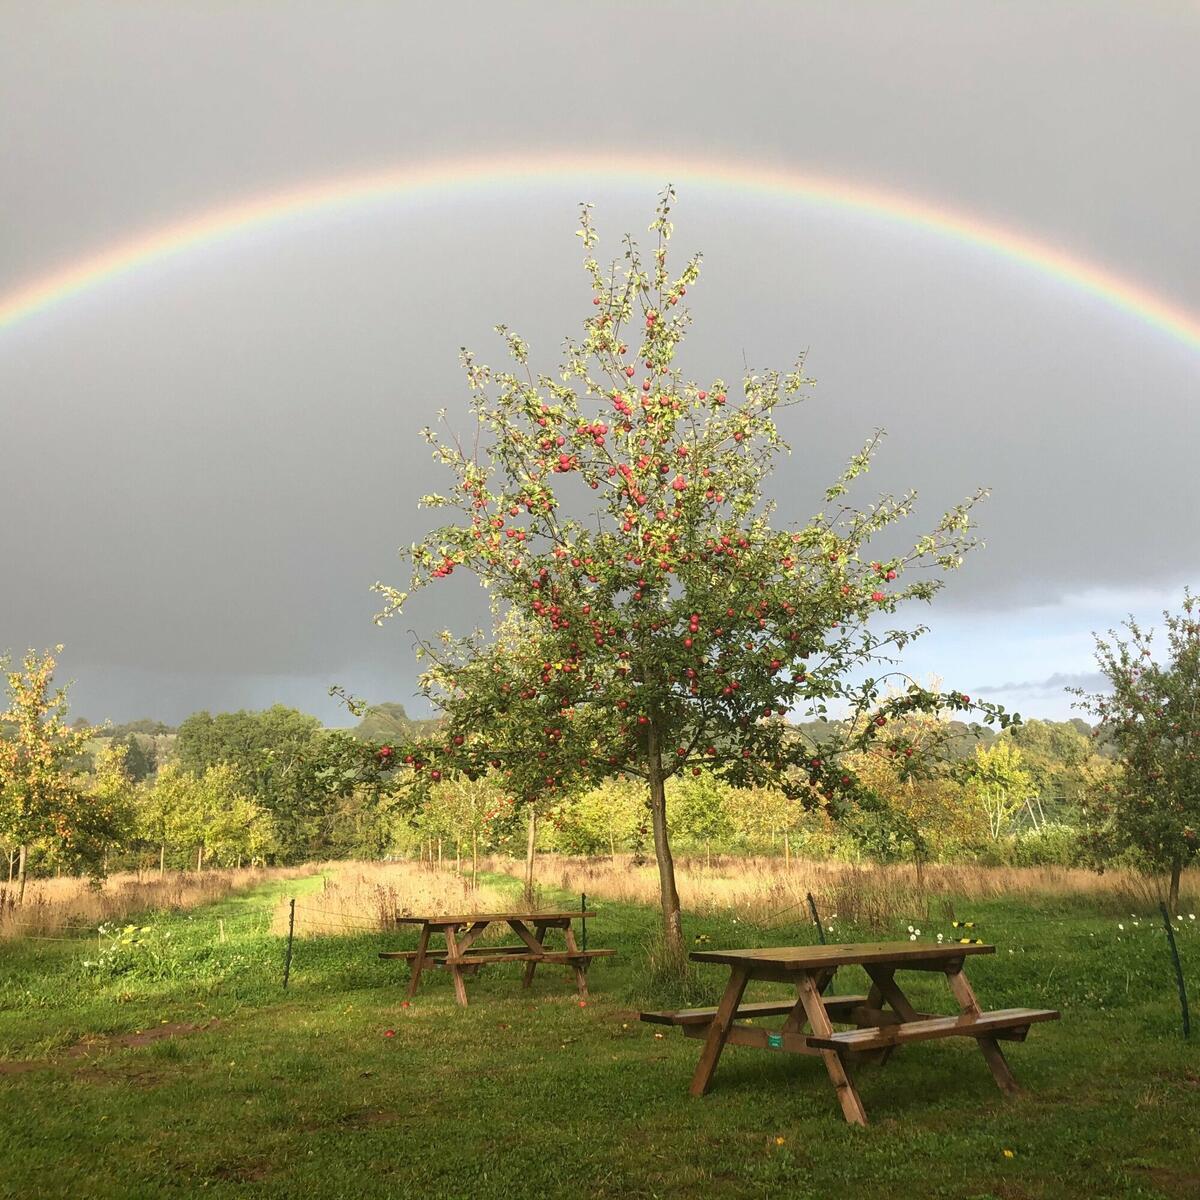 Somewhere… over the rainbow  🍎  The Tasting Room cider garden